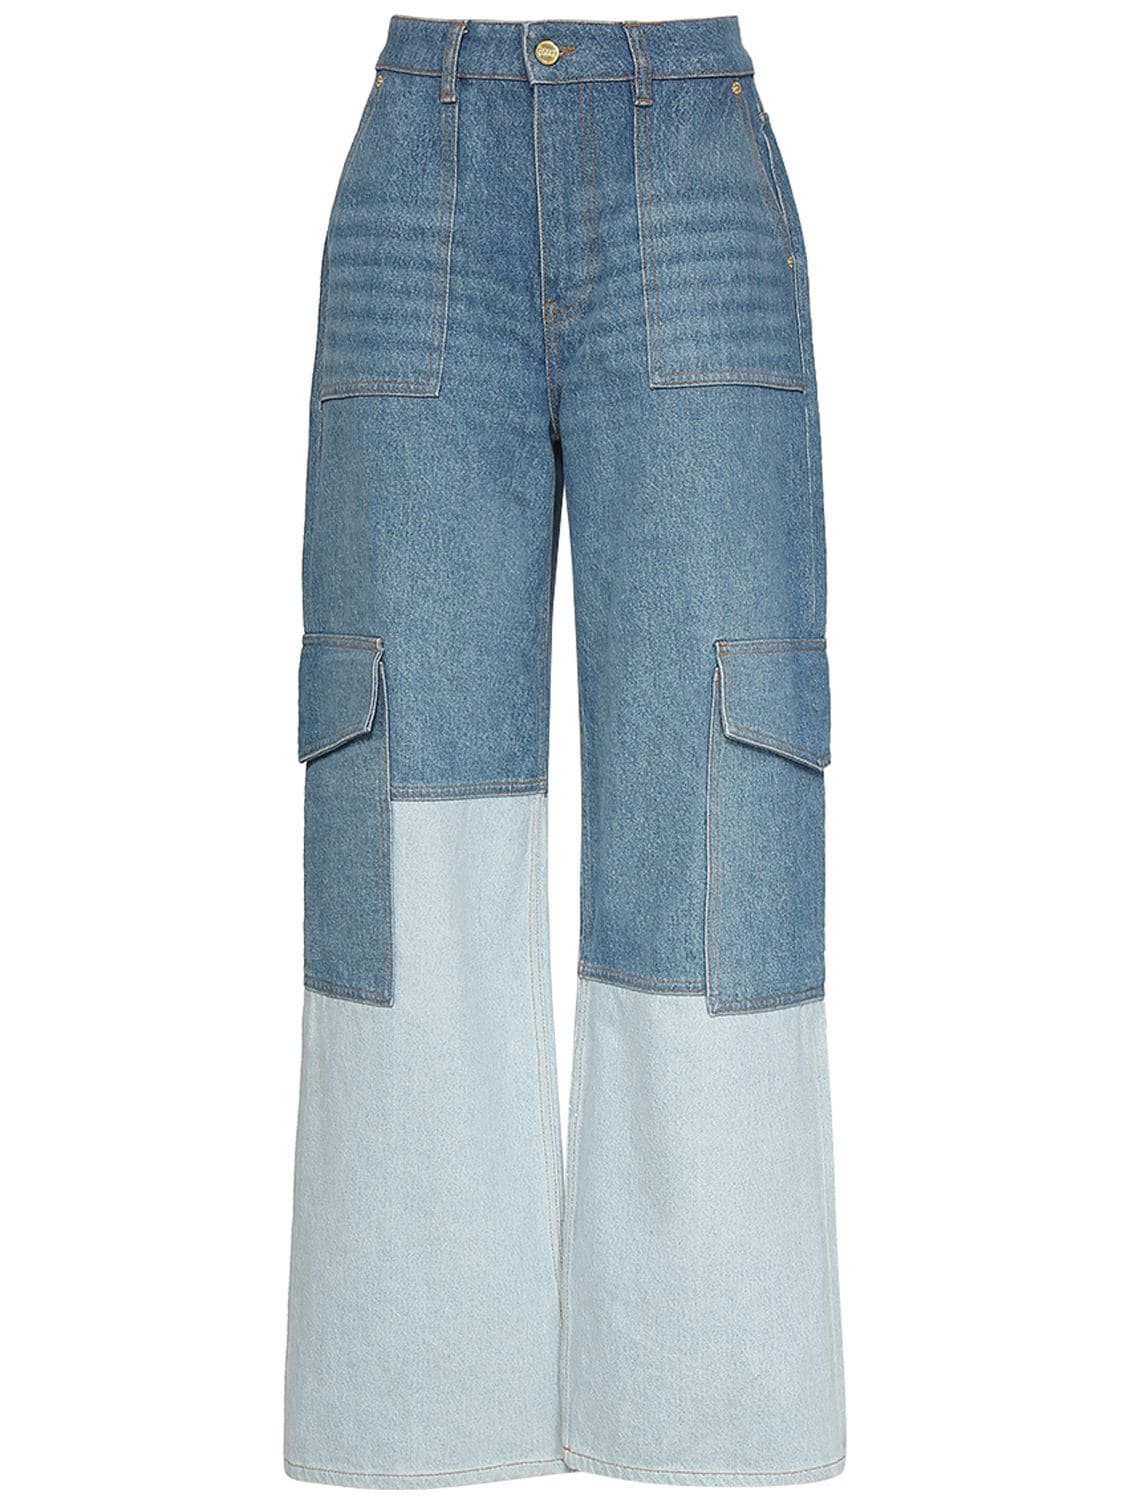 Image of High Rise Cotton Denim Cargo Jeans